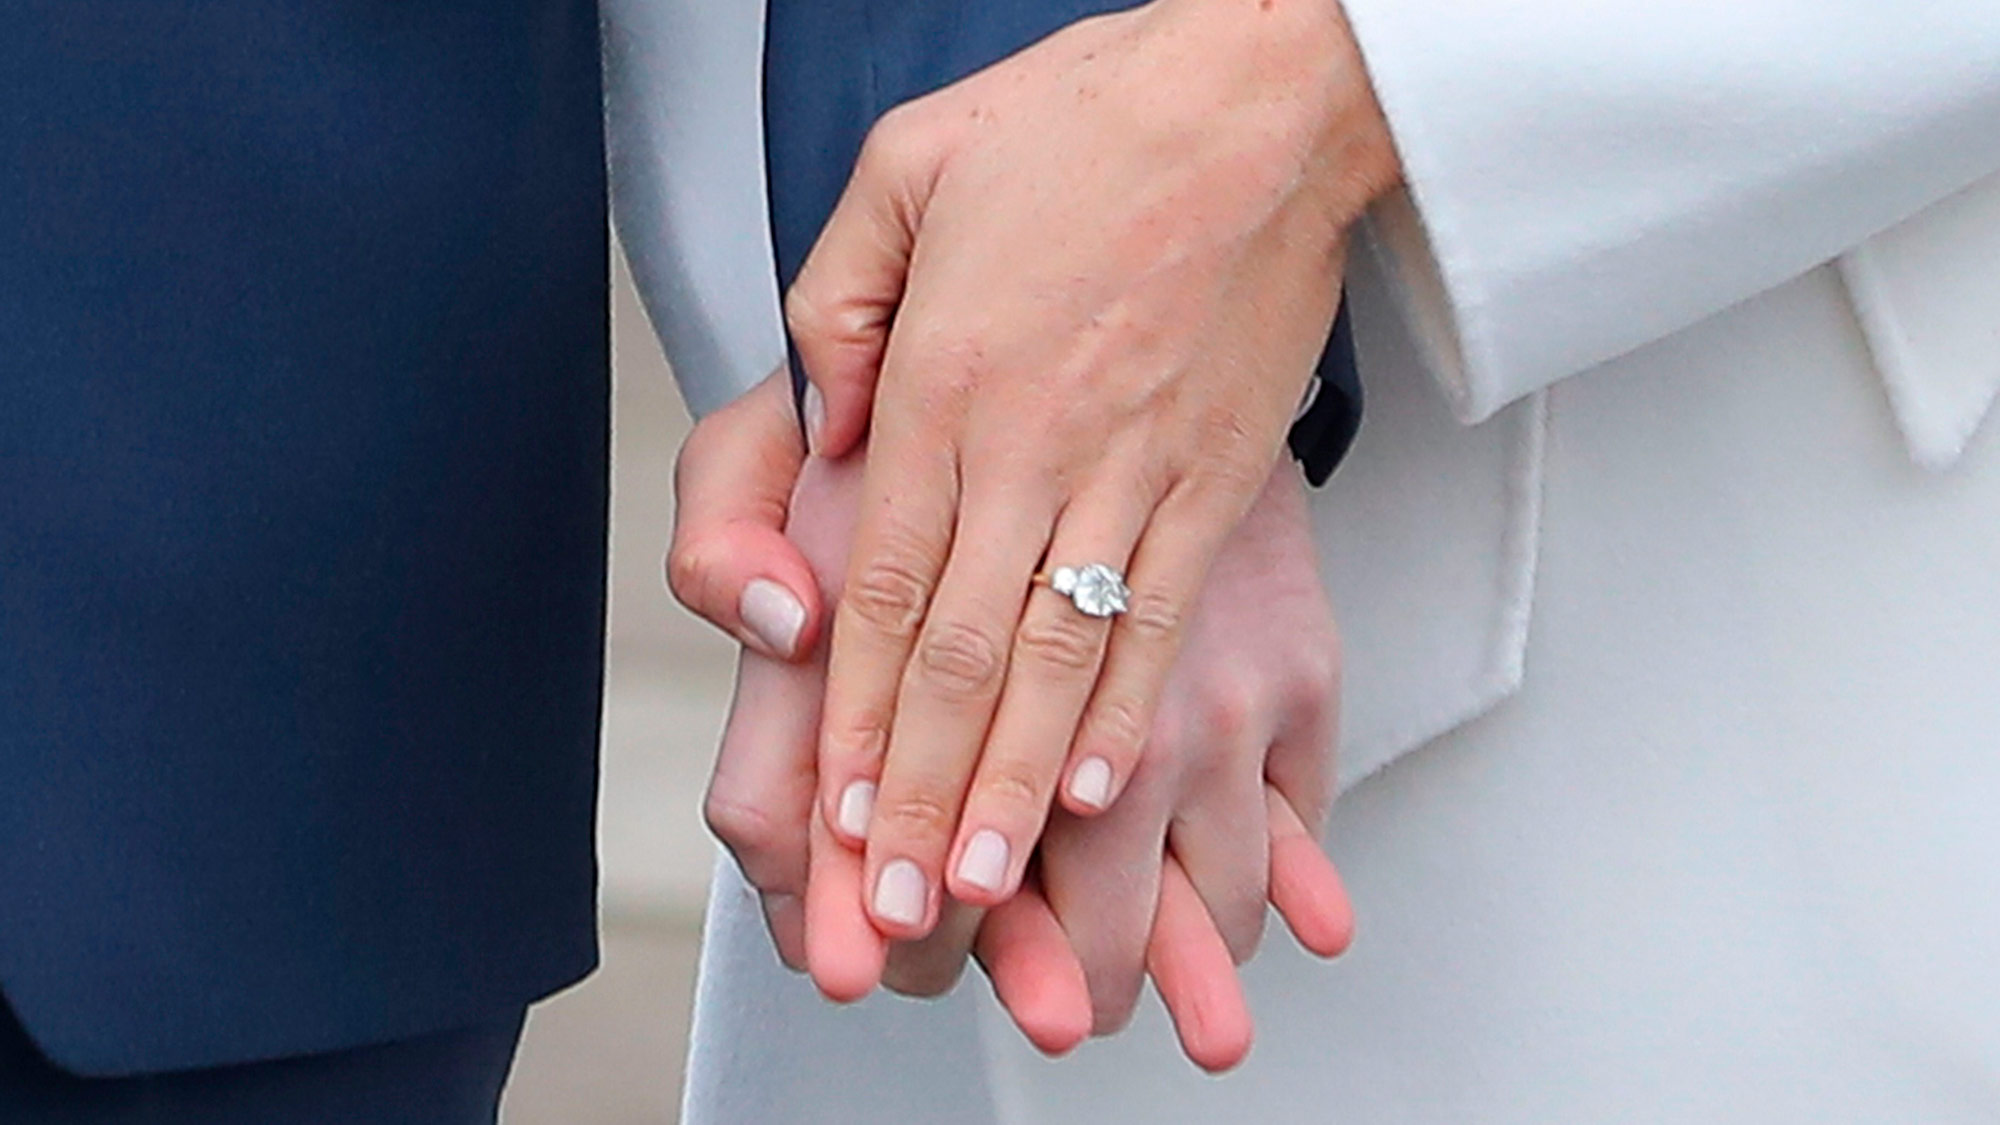 Here’s the real reason Meghan Markle changed her engagement ring